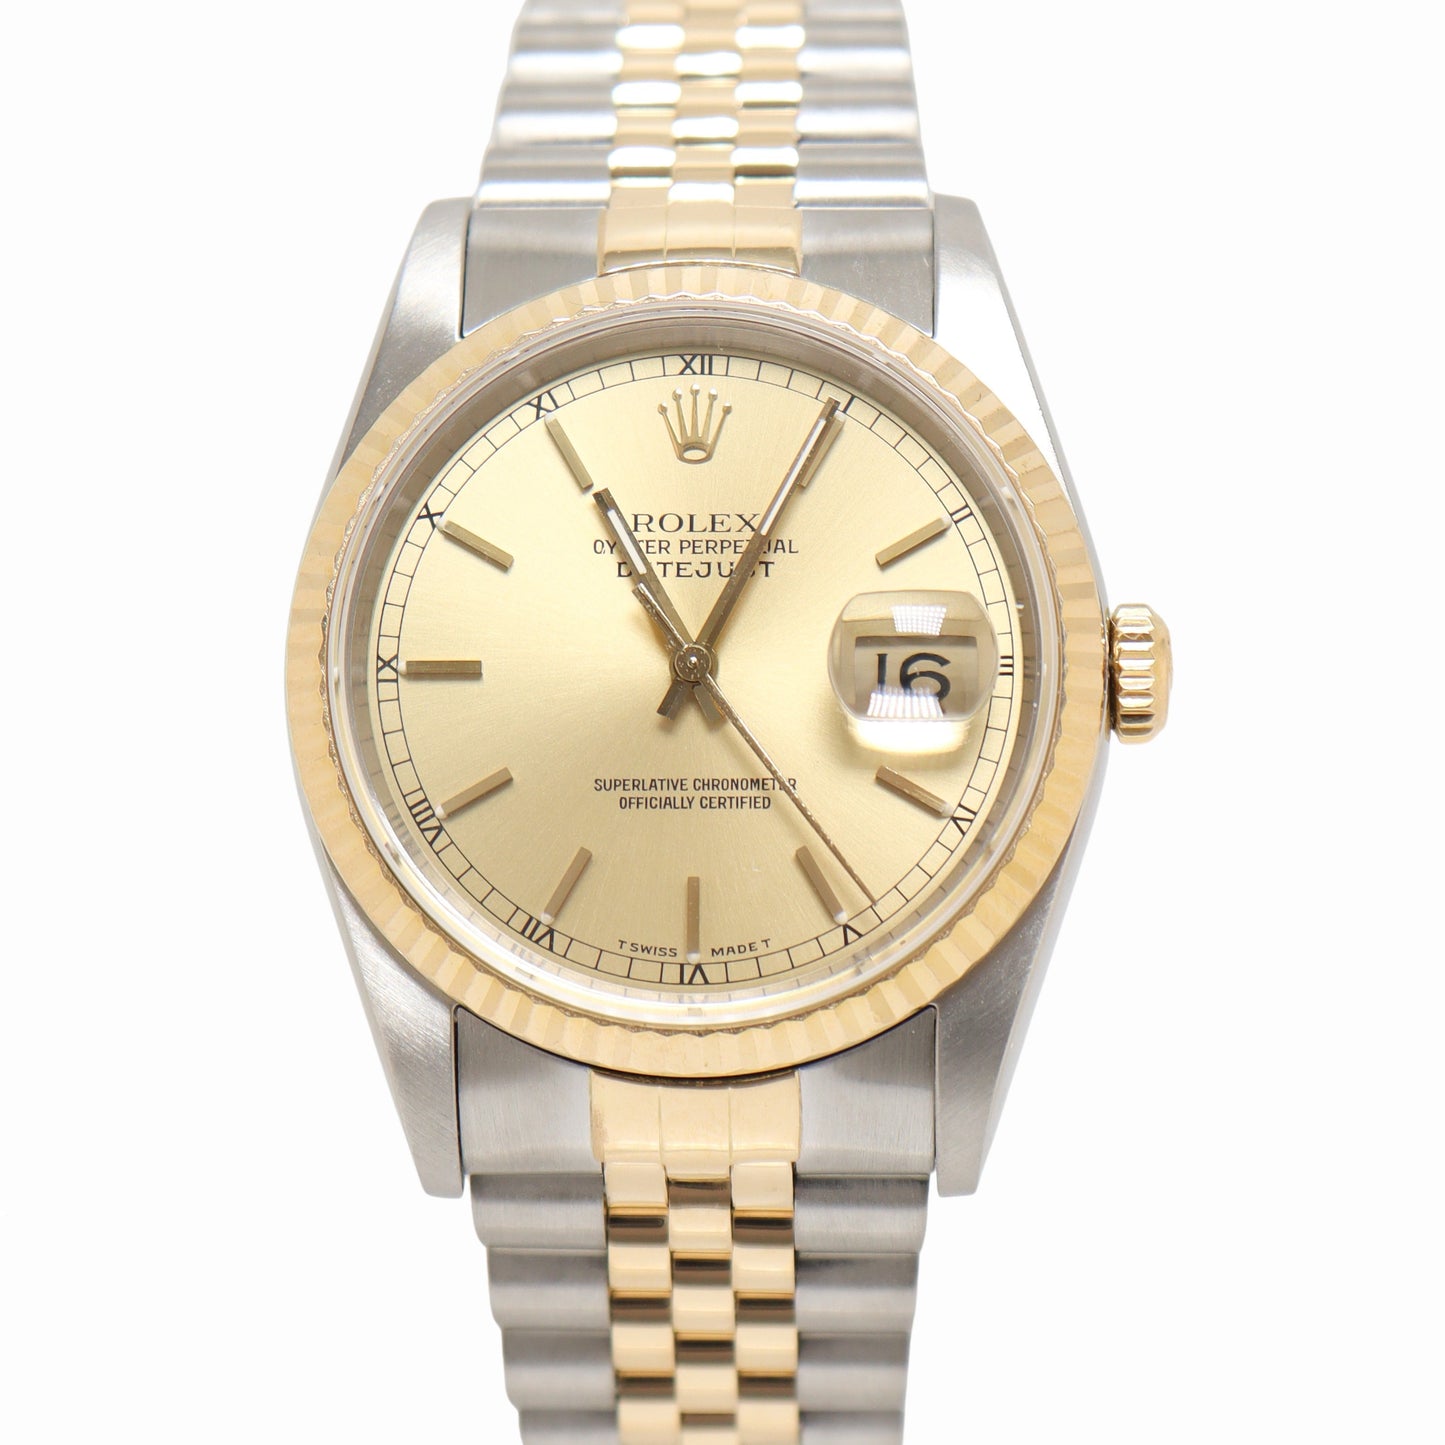 Rolex Datejust Two Tone Yellow Gold & Steel 36mm Champagne Stick Dial Watch Reference#: 16233 - Happy Jewelers Fine Jewelry Lifetime Warranty